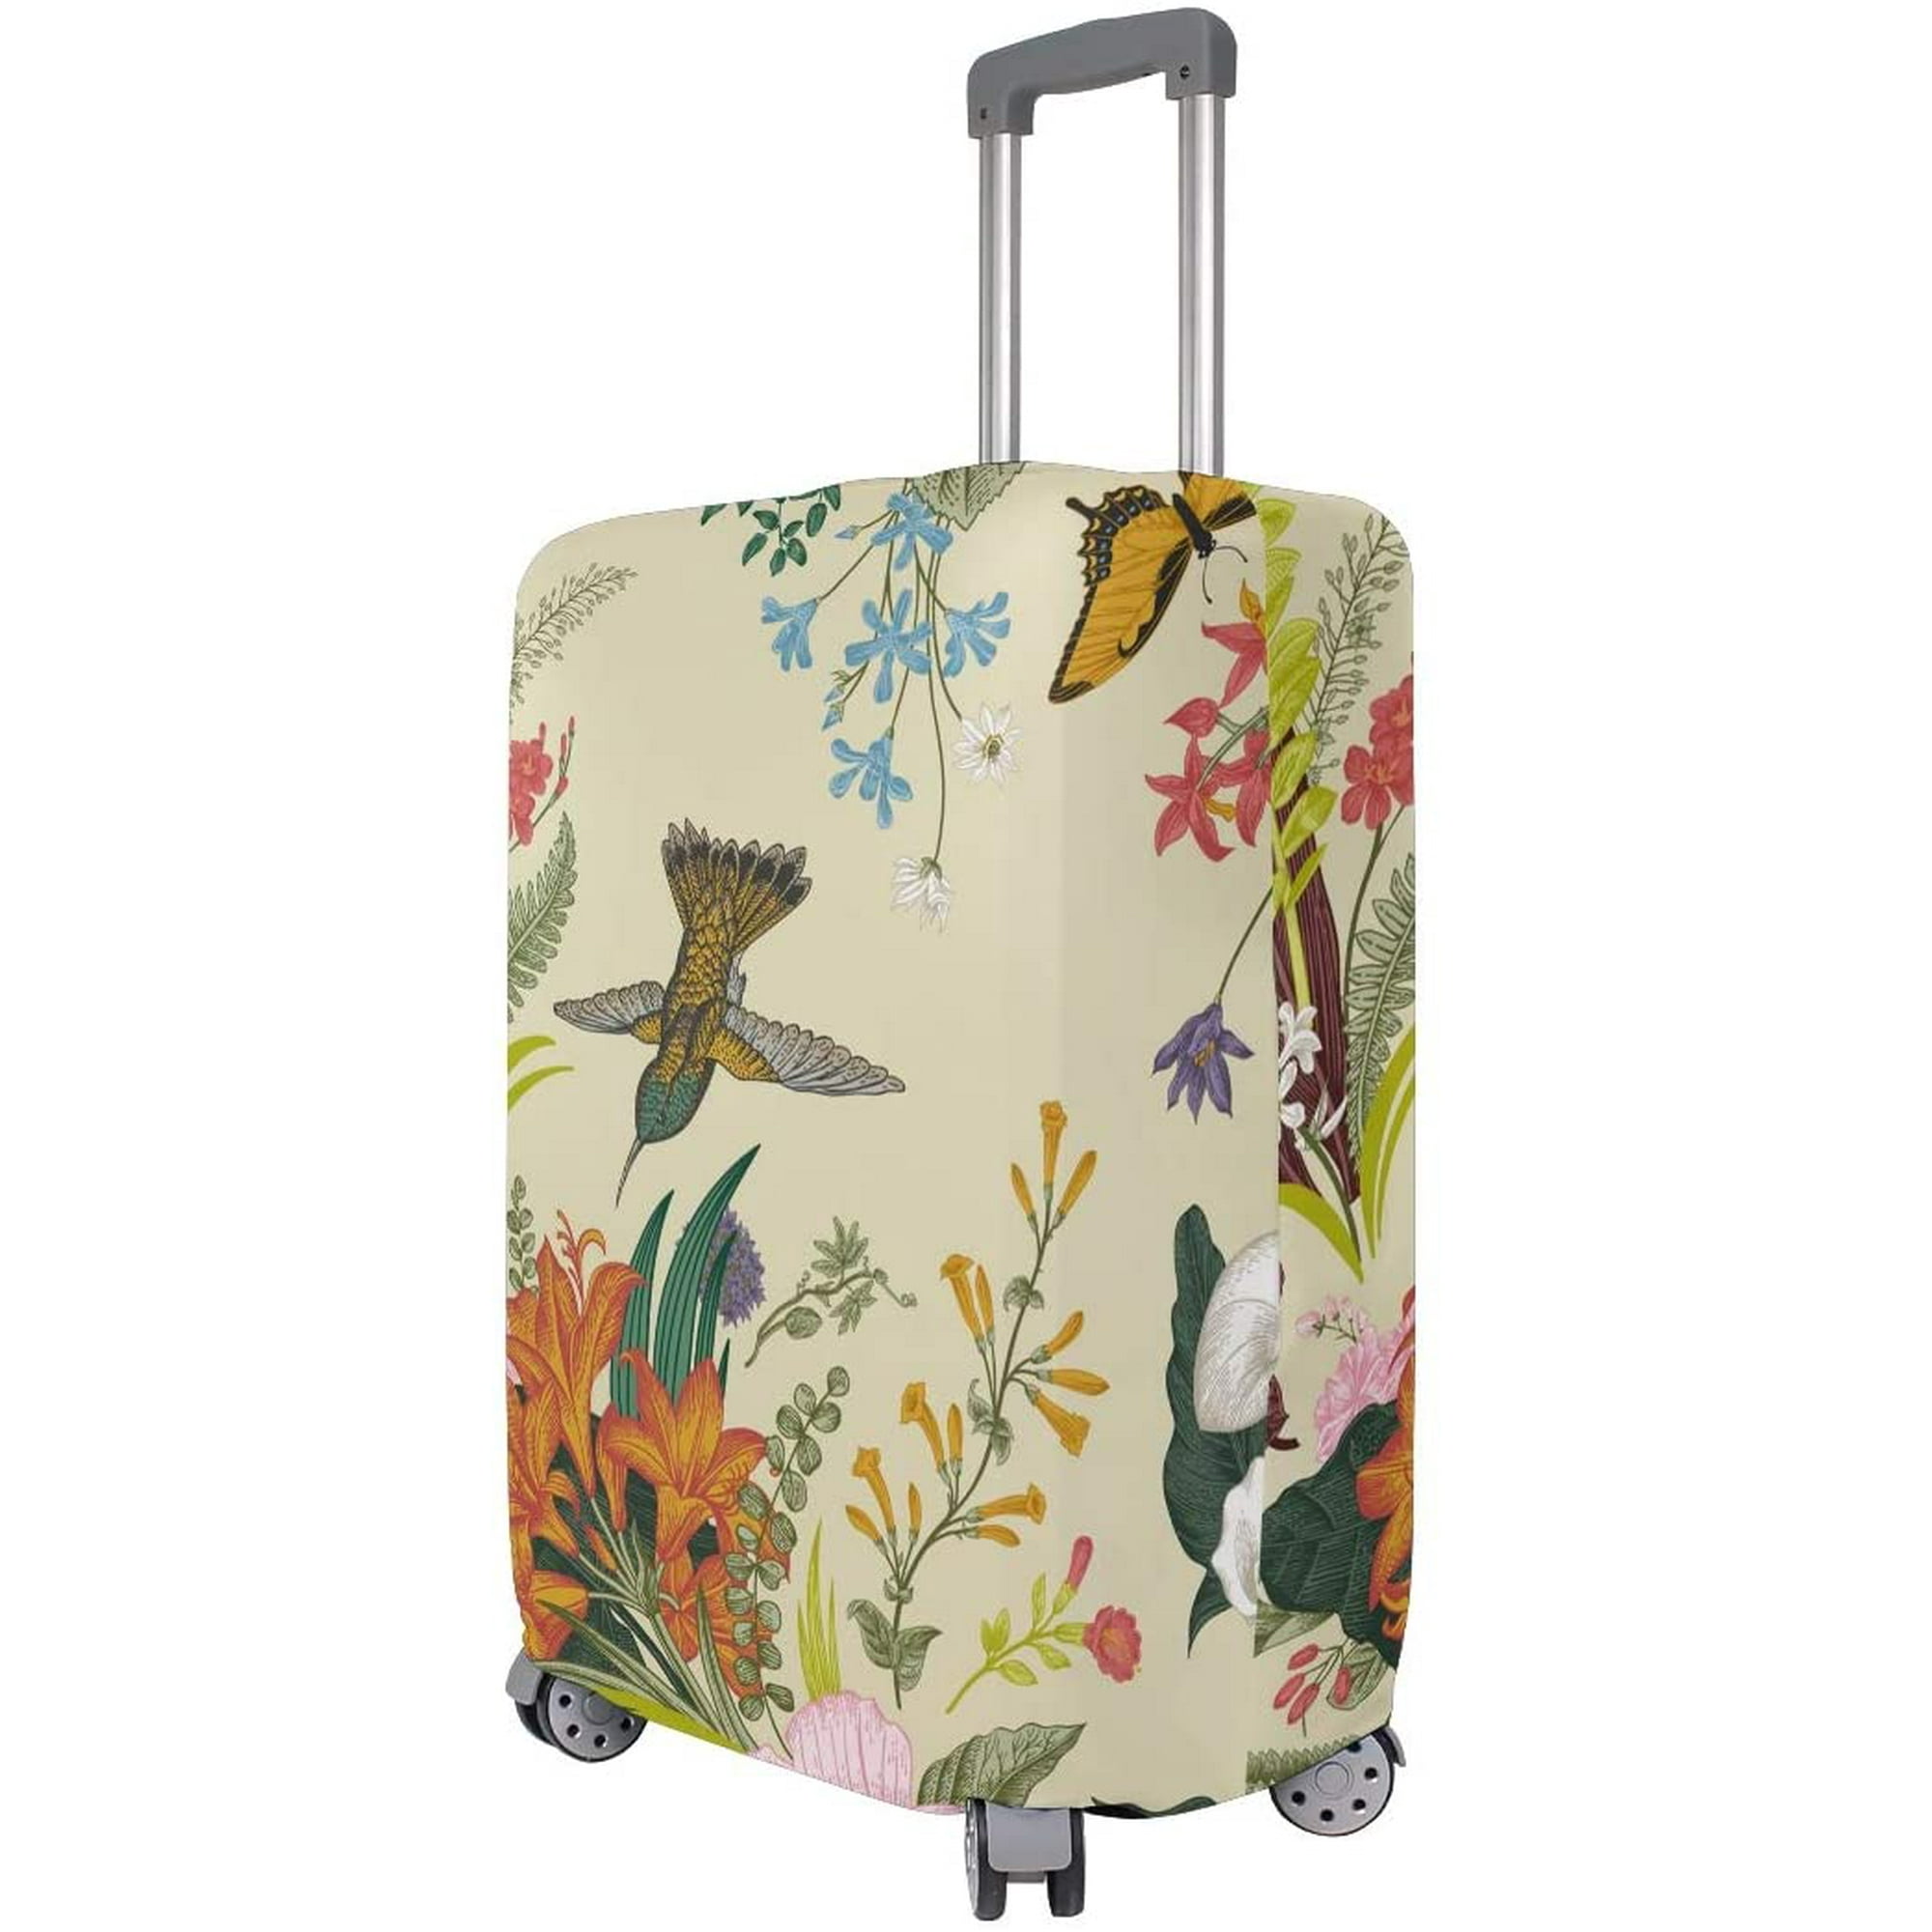 FOLPPLY Pailsey Birds Floral Print Luggage Cover Baggage Suitcase Travel Protector Fit for 18-32 Inch 